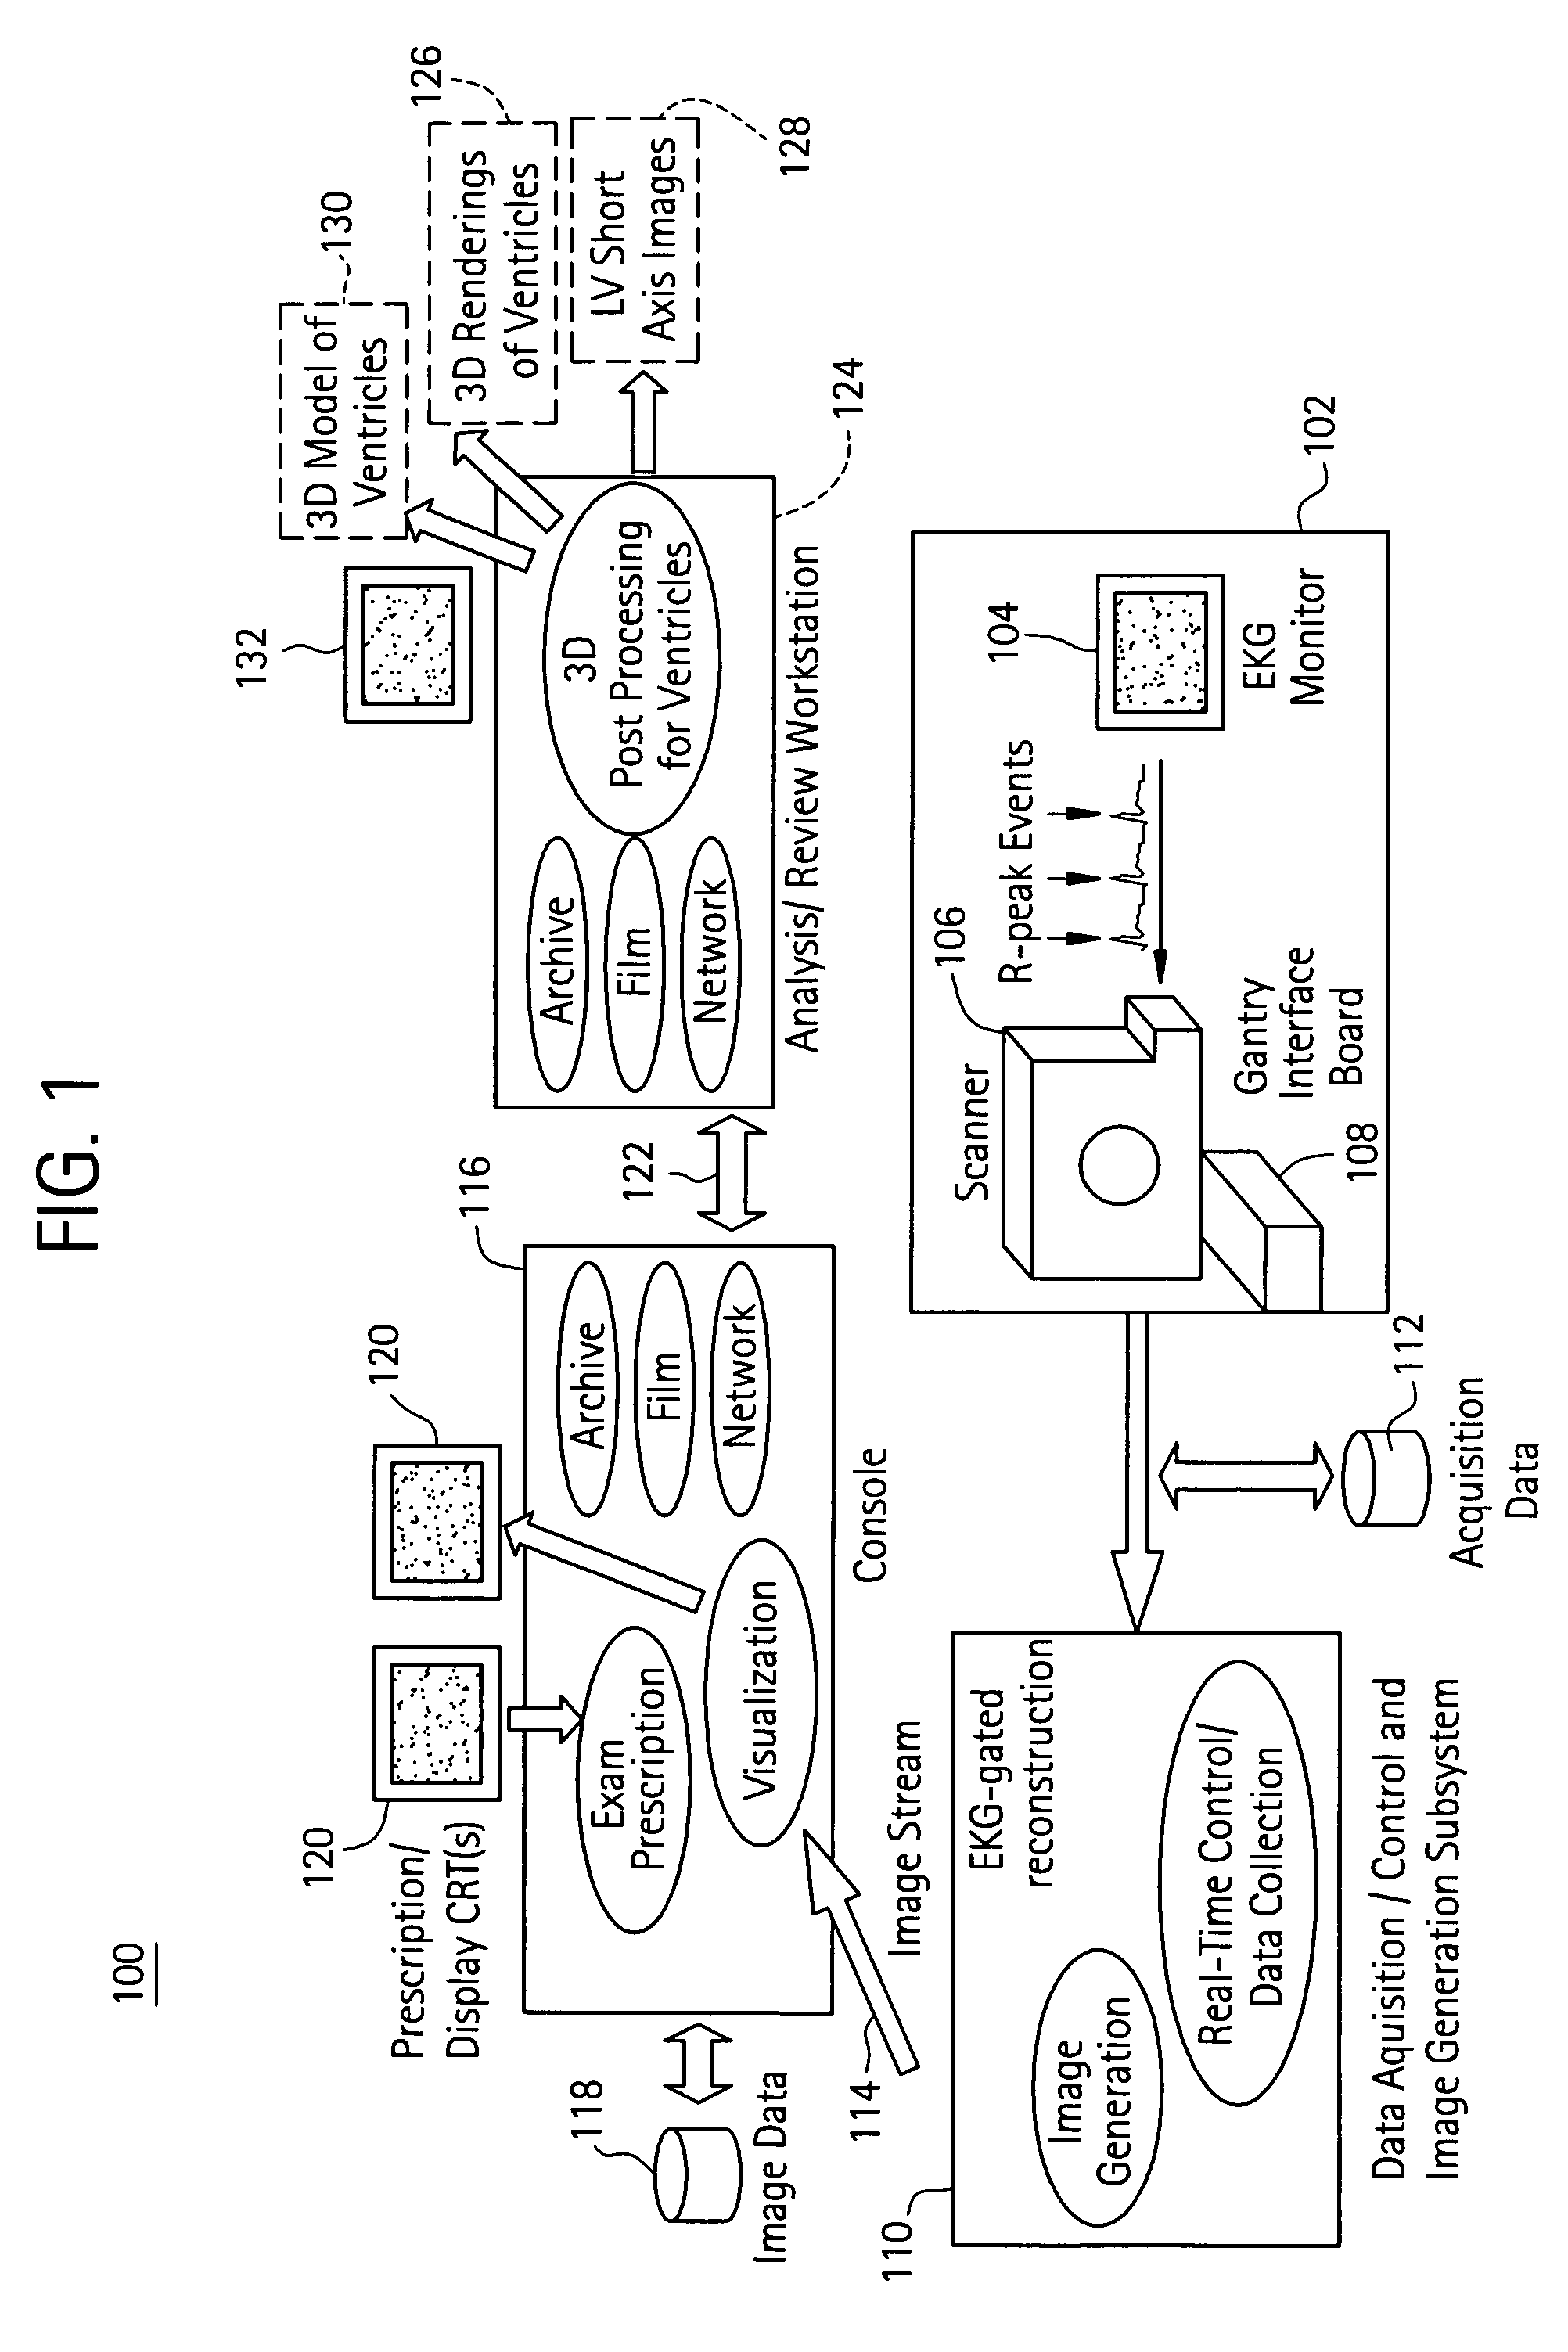 Cardiac imaging system and method for planning minimally invasive direct coronary artery bypass surgery